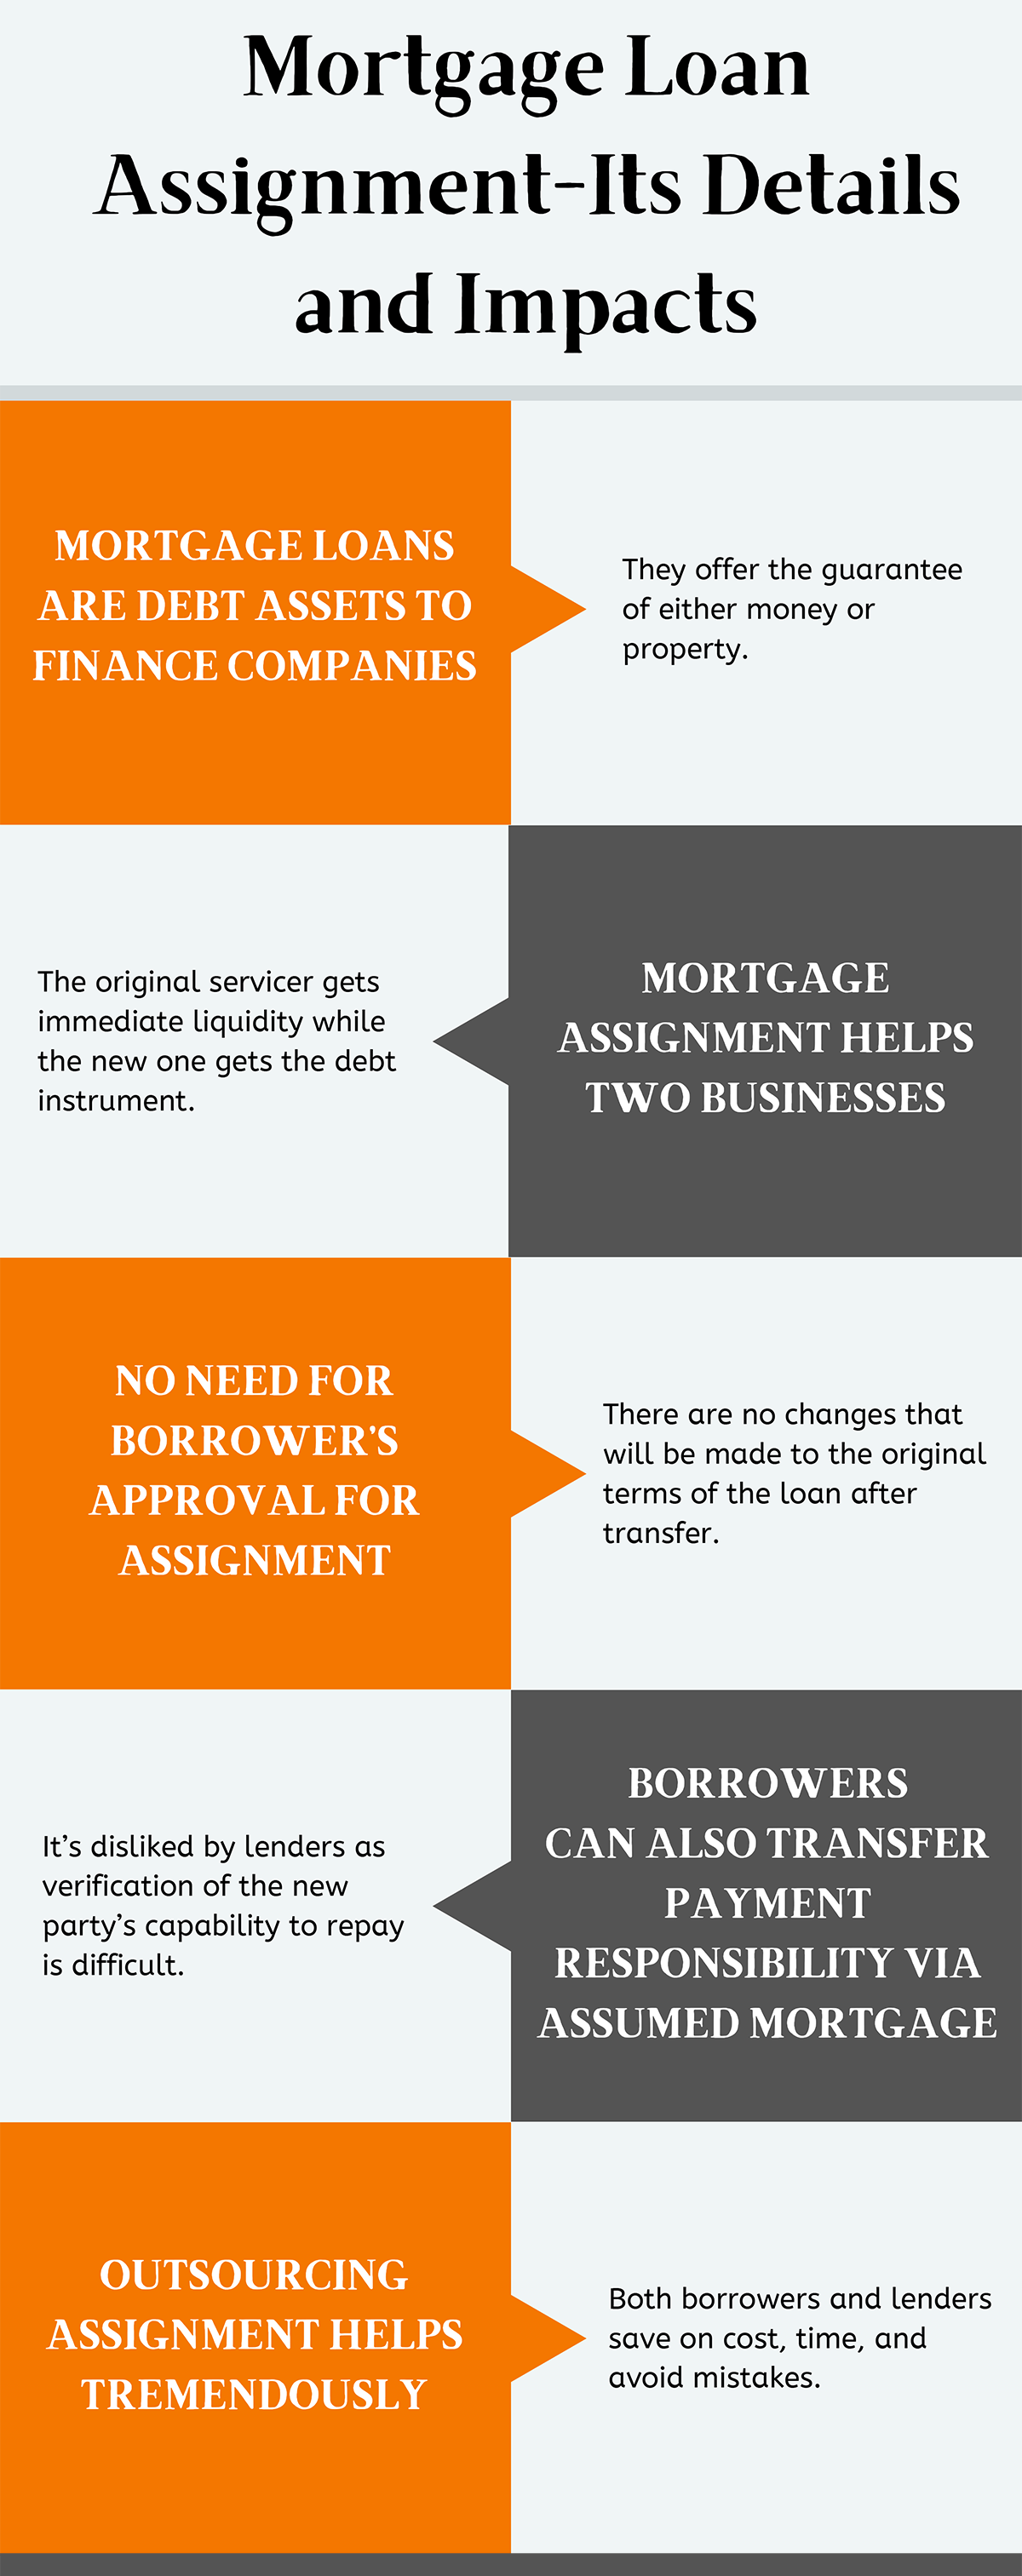 Mortgage Loan Assignment-Its Details and Impacts